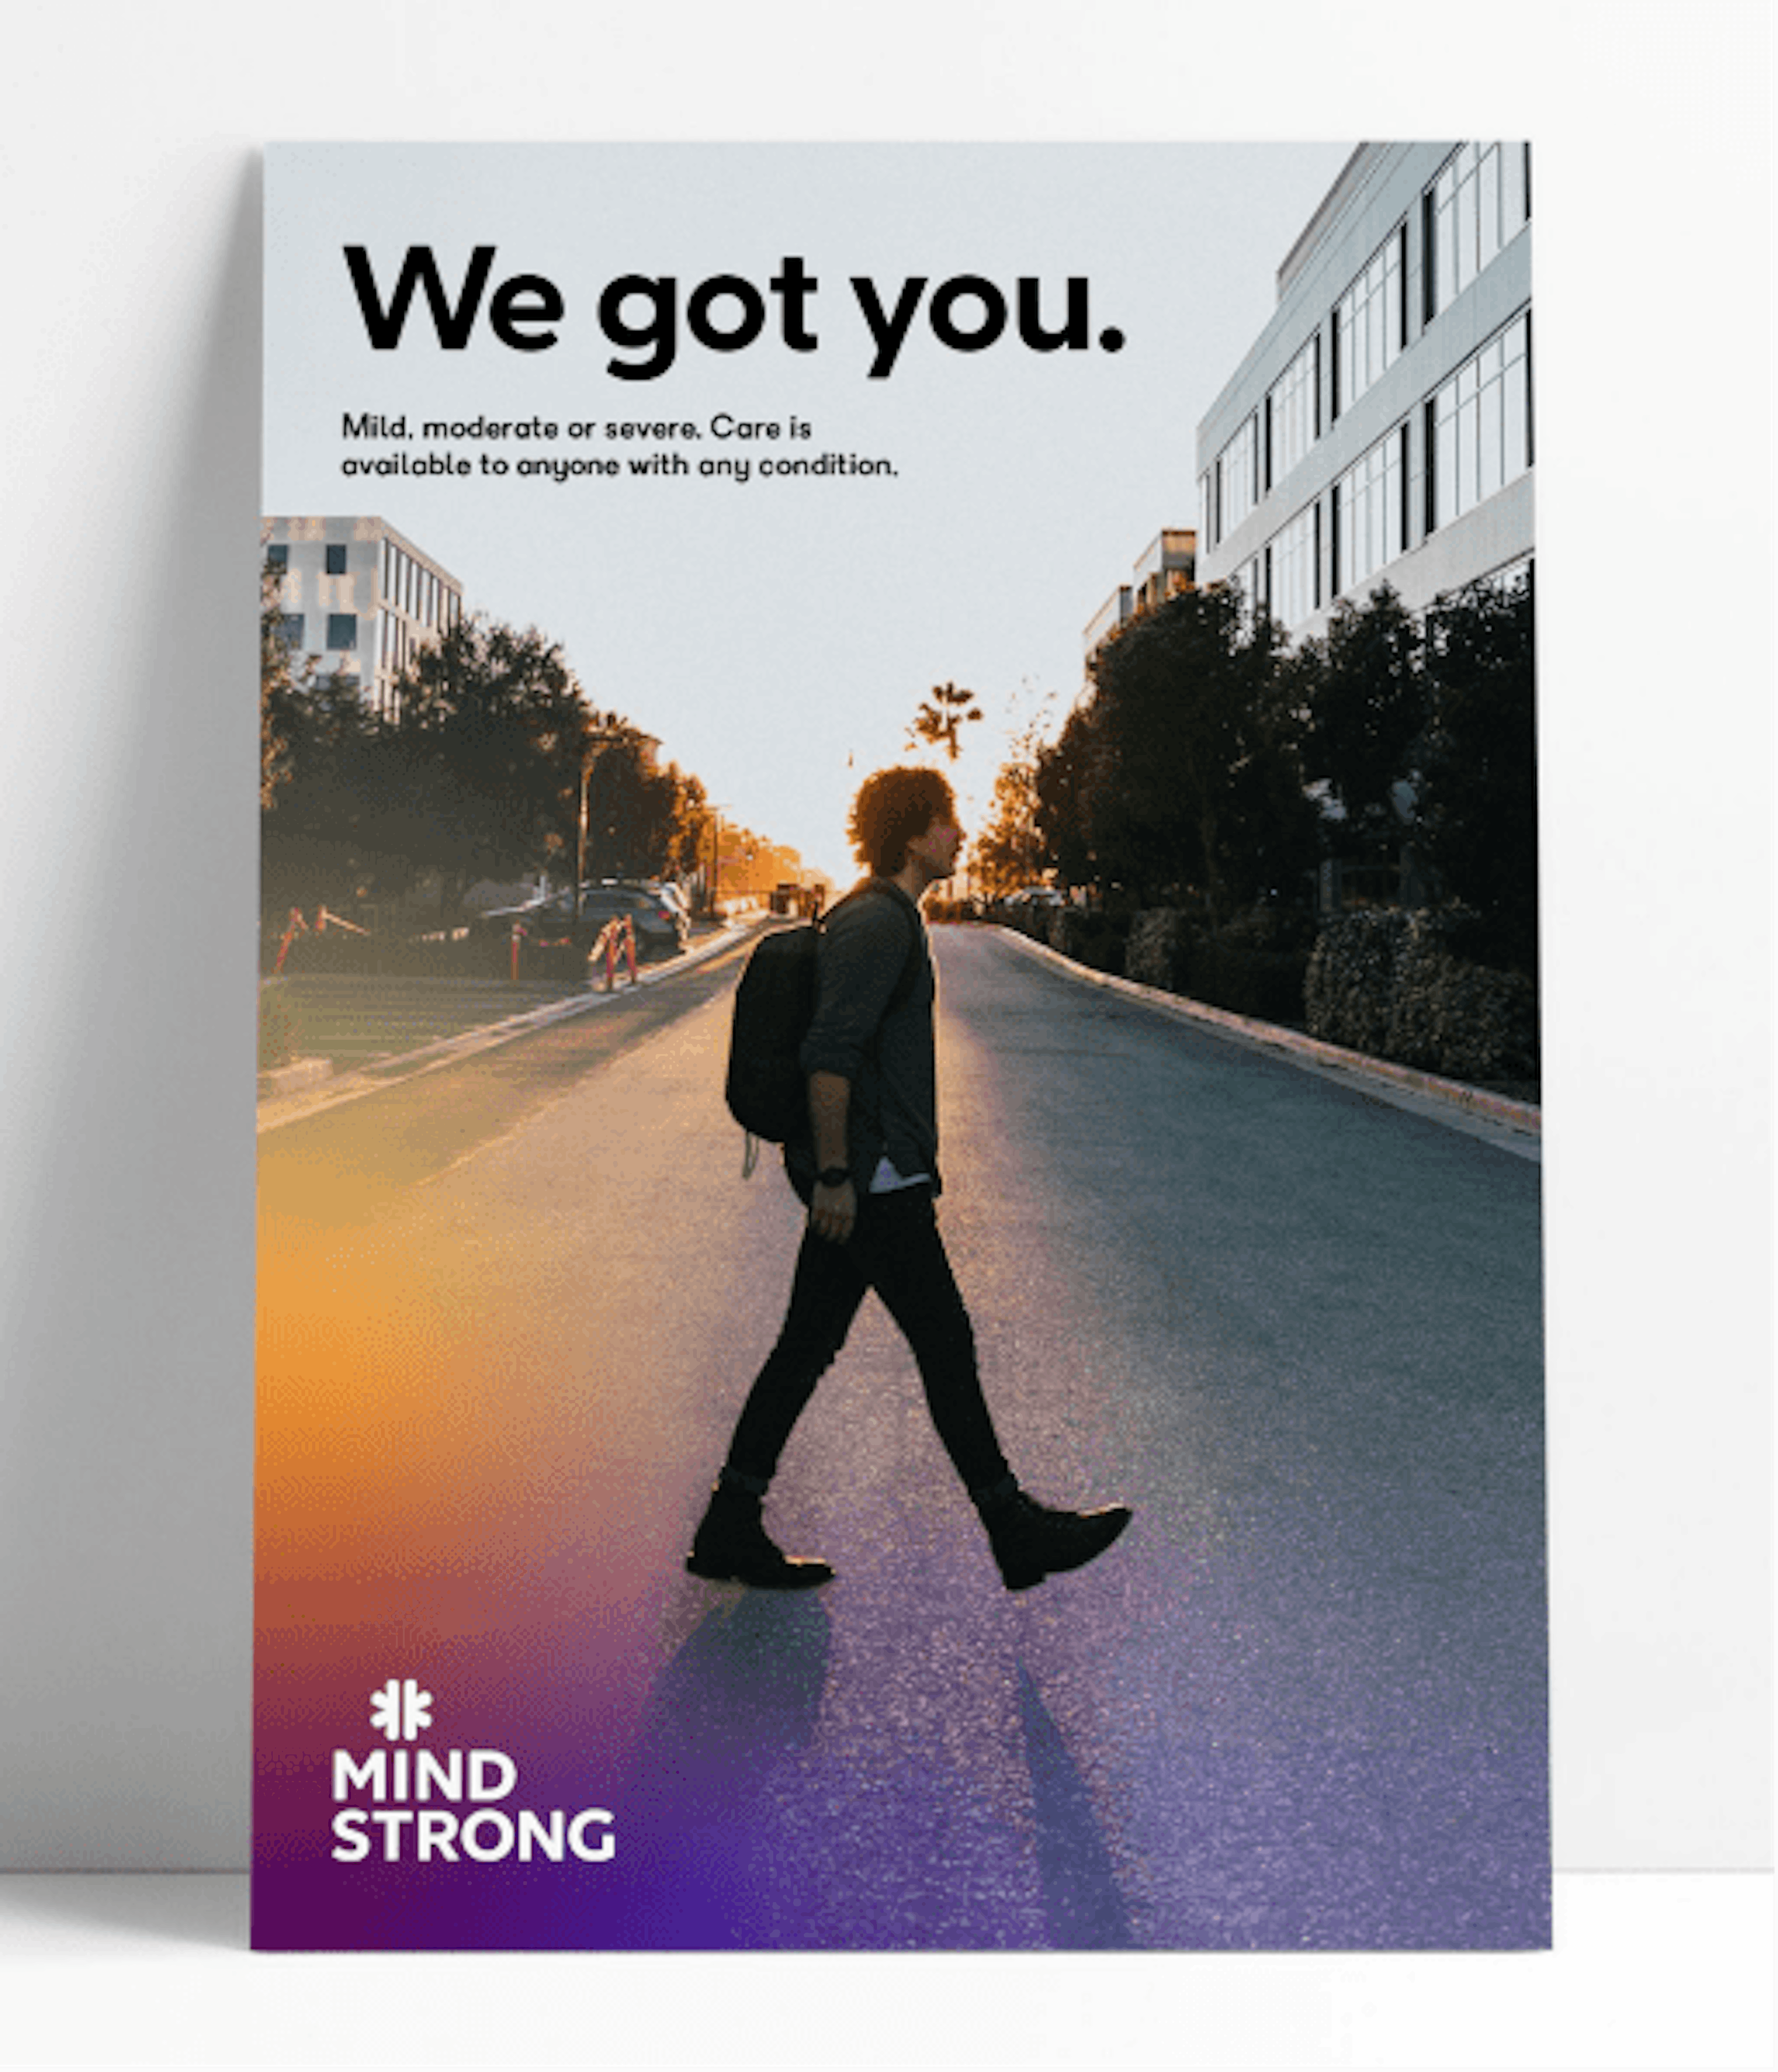 A Mindstrong branded photo of a man crossing a street.